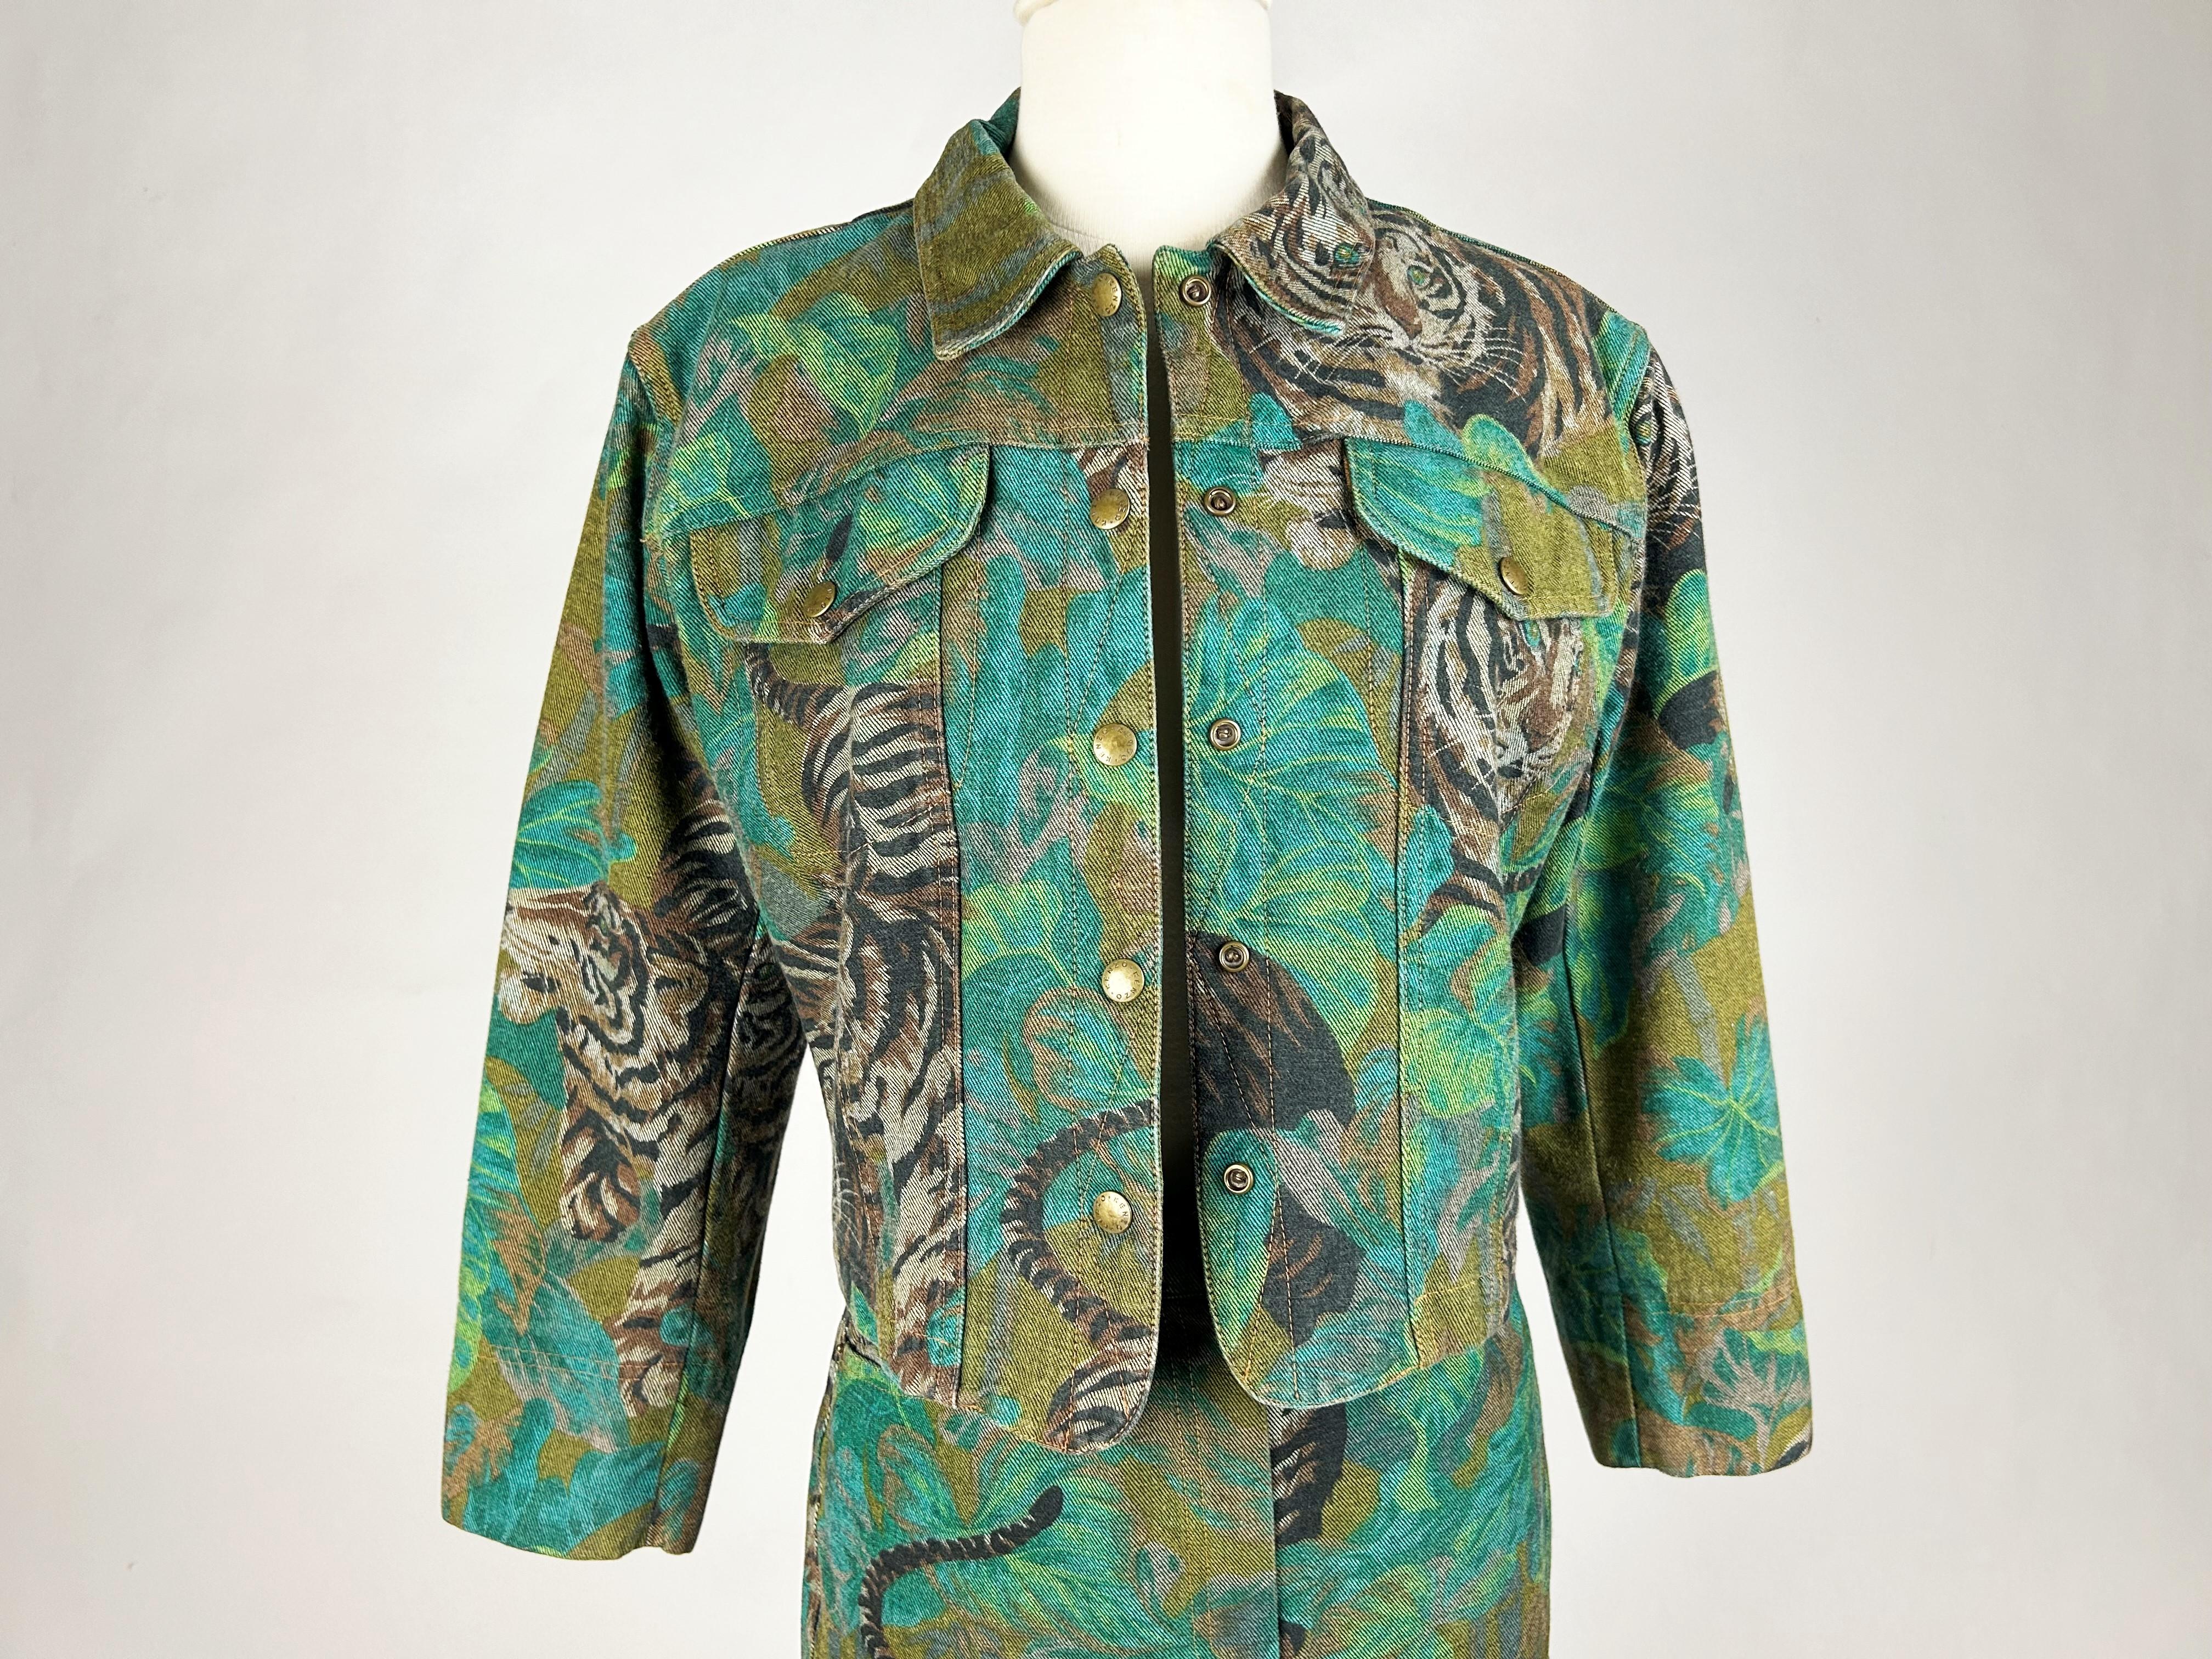 Jacket and Skirt by Kenzo Takada, Jungle & Tiger Print on Denim - French C. 1990 For Sale 10